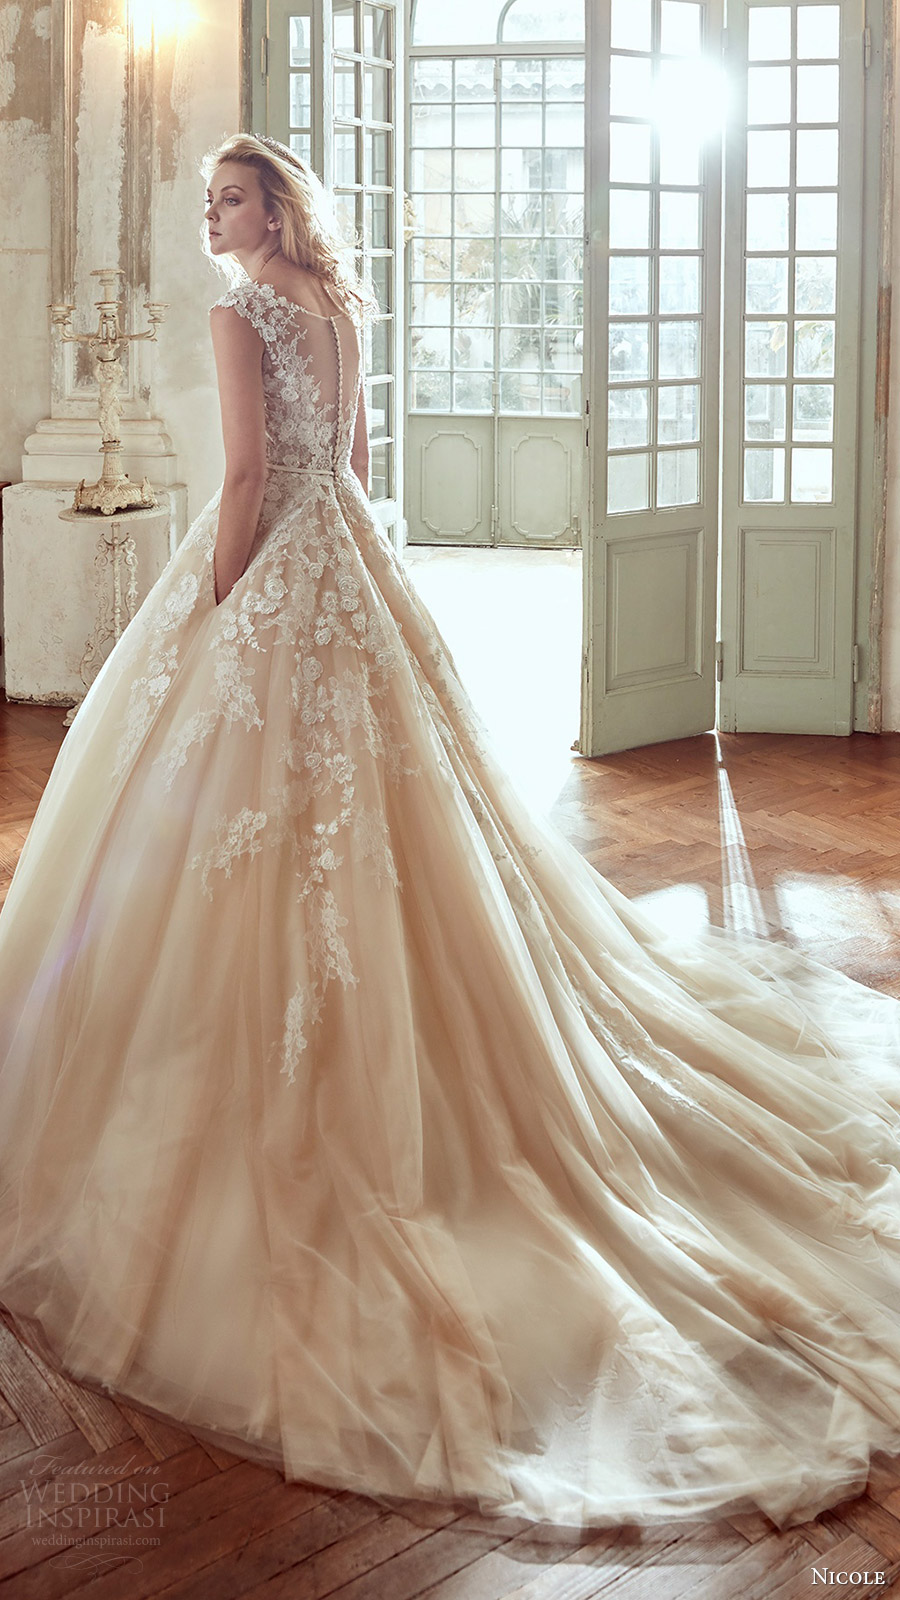 Breathtaking gold wedding ball gown with stunning floral appliques. // mysweetengagement.com